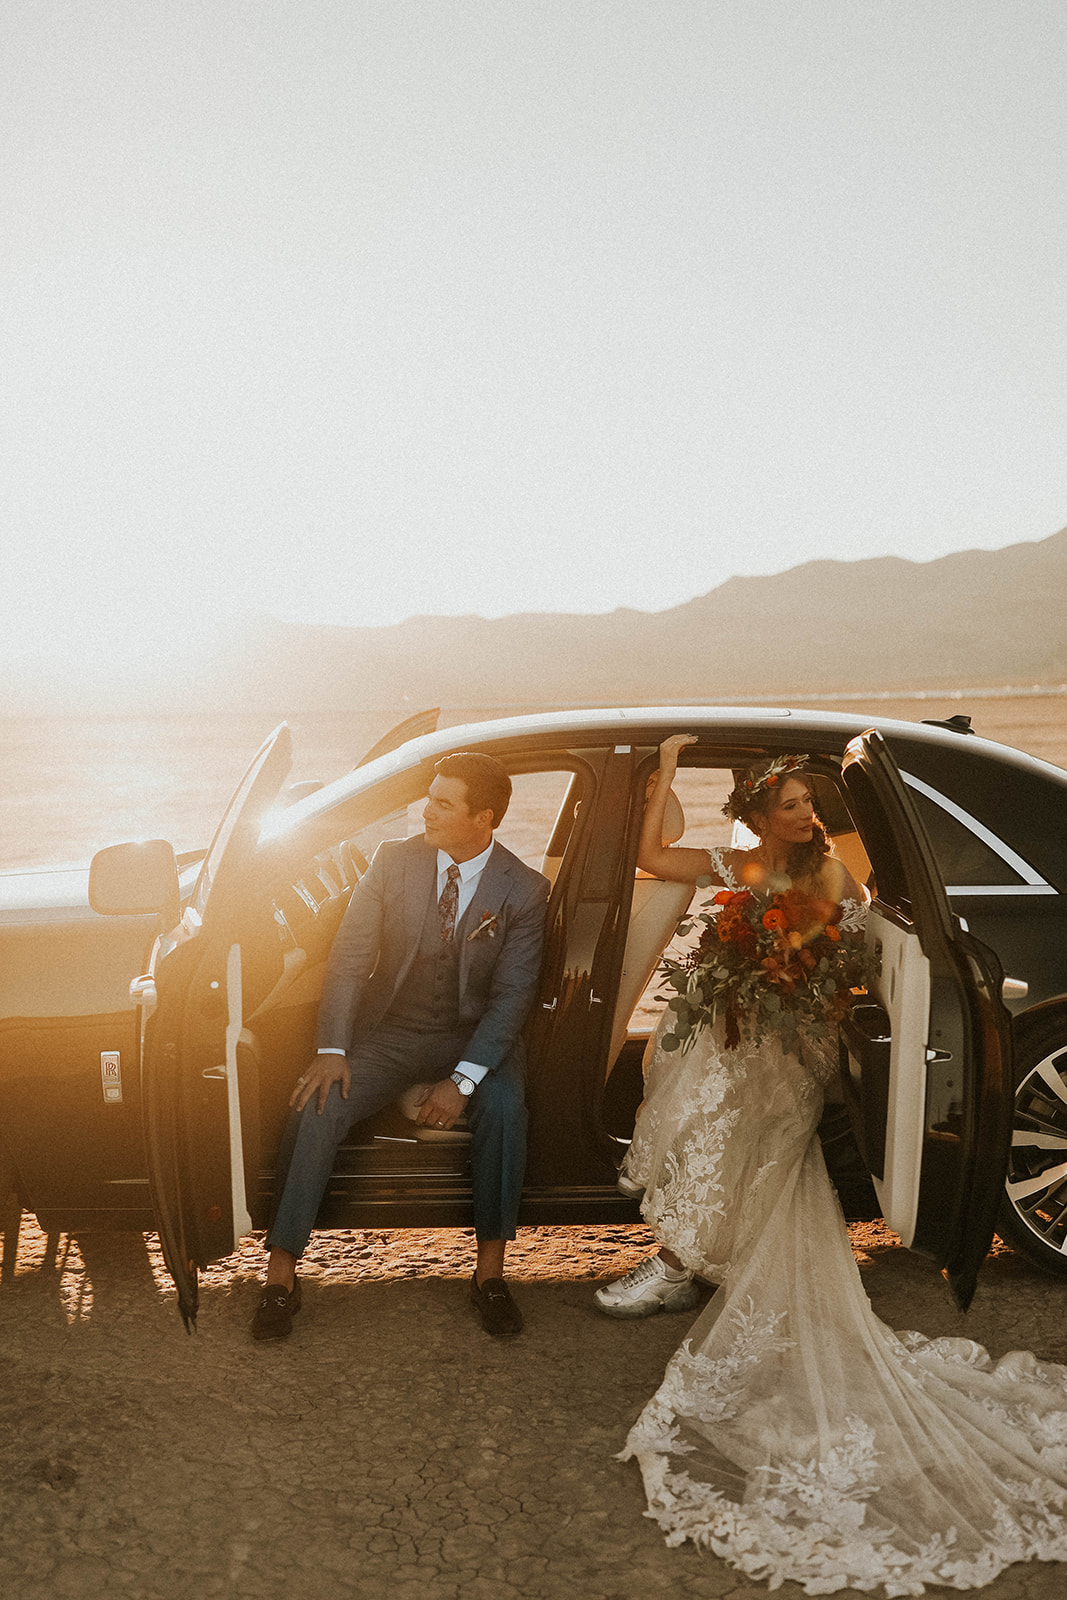 All Doors Open of Rolls Royce While Groom is in Front Seat & Bride is in the back during Dry Lake Bed Fall Inspired Elopement 